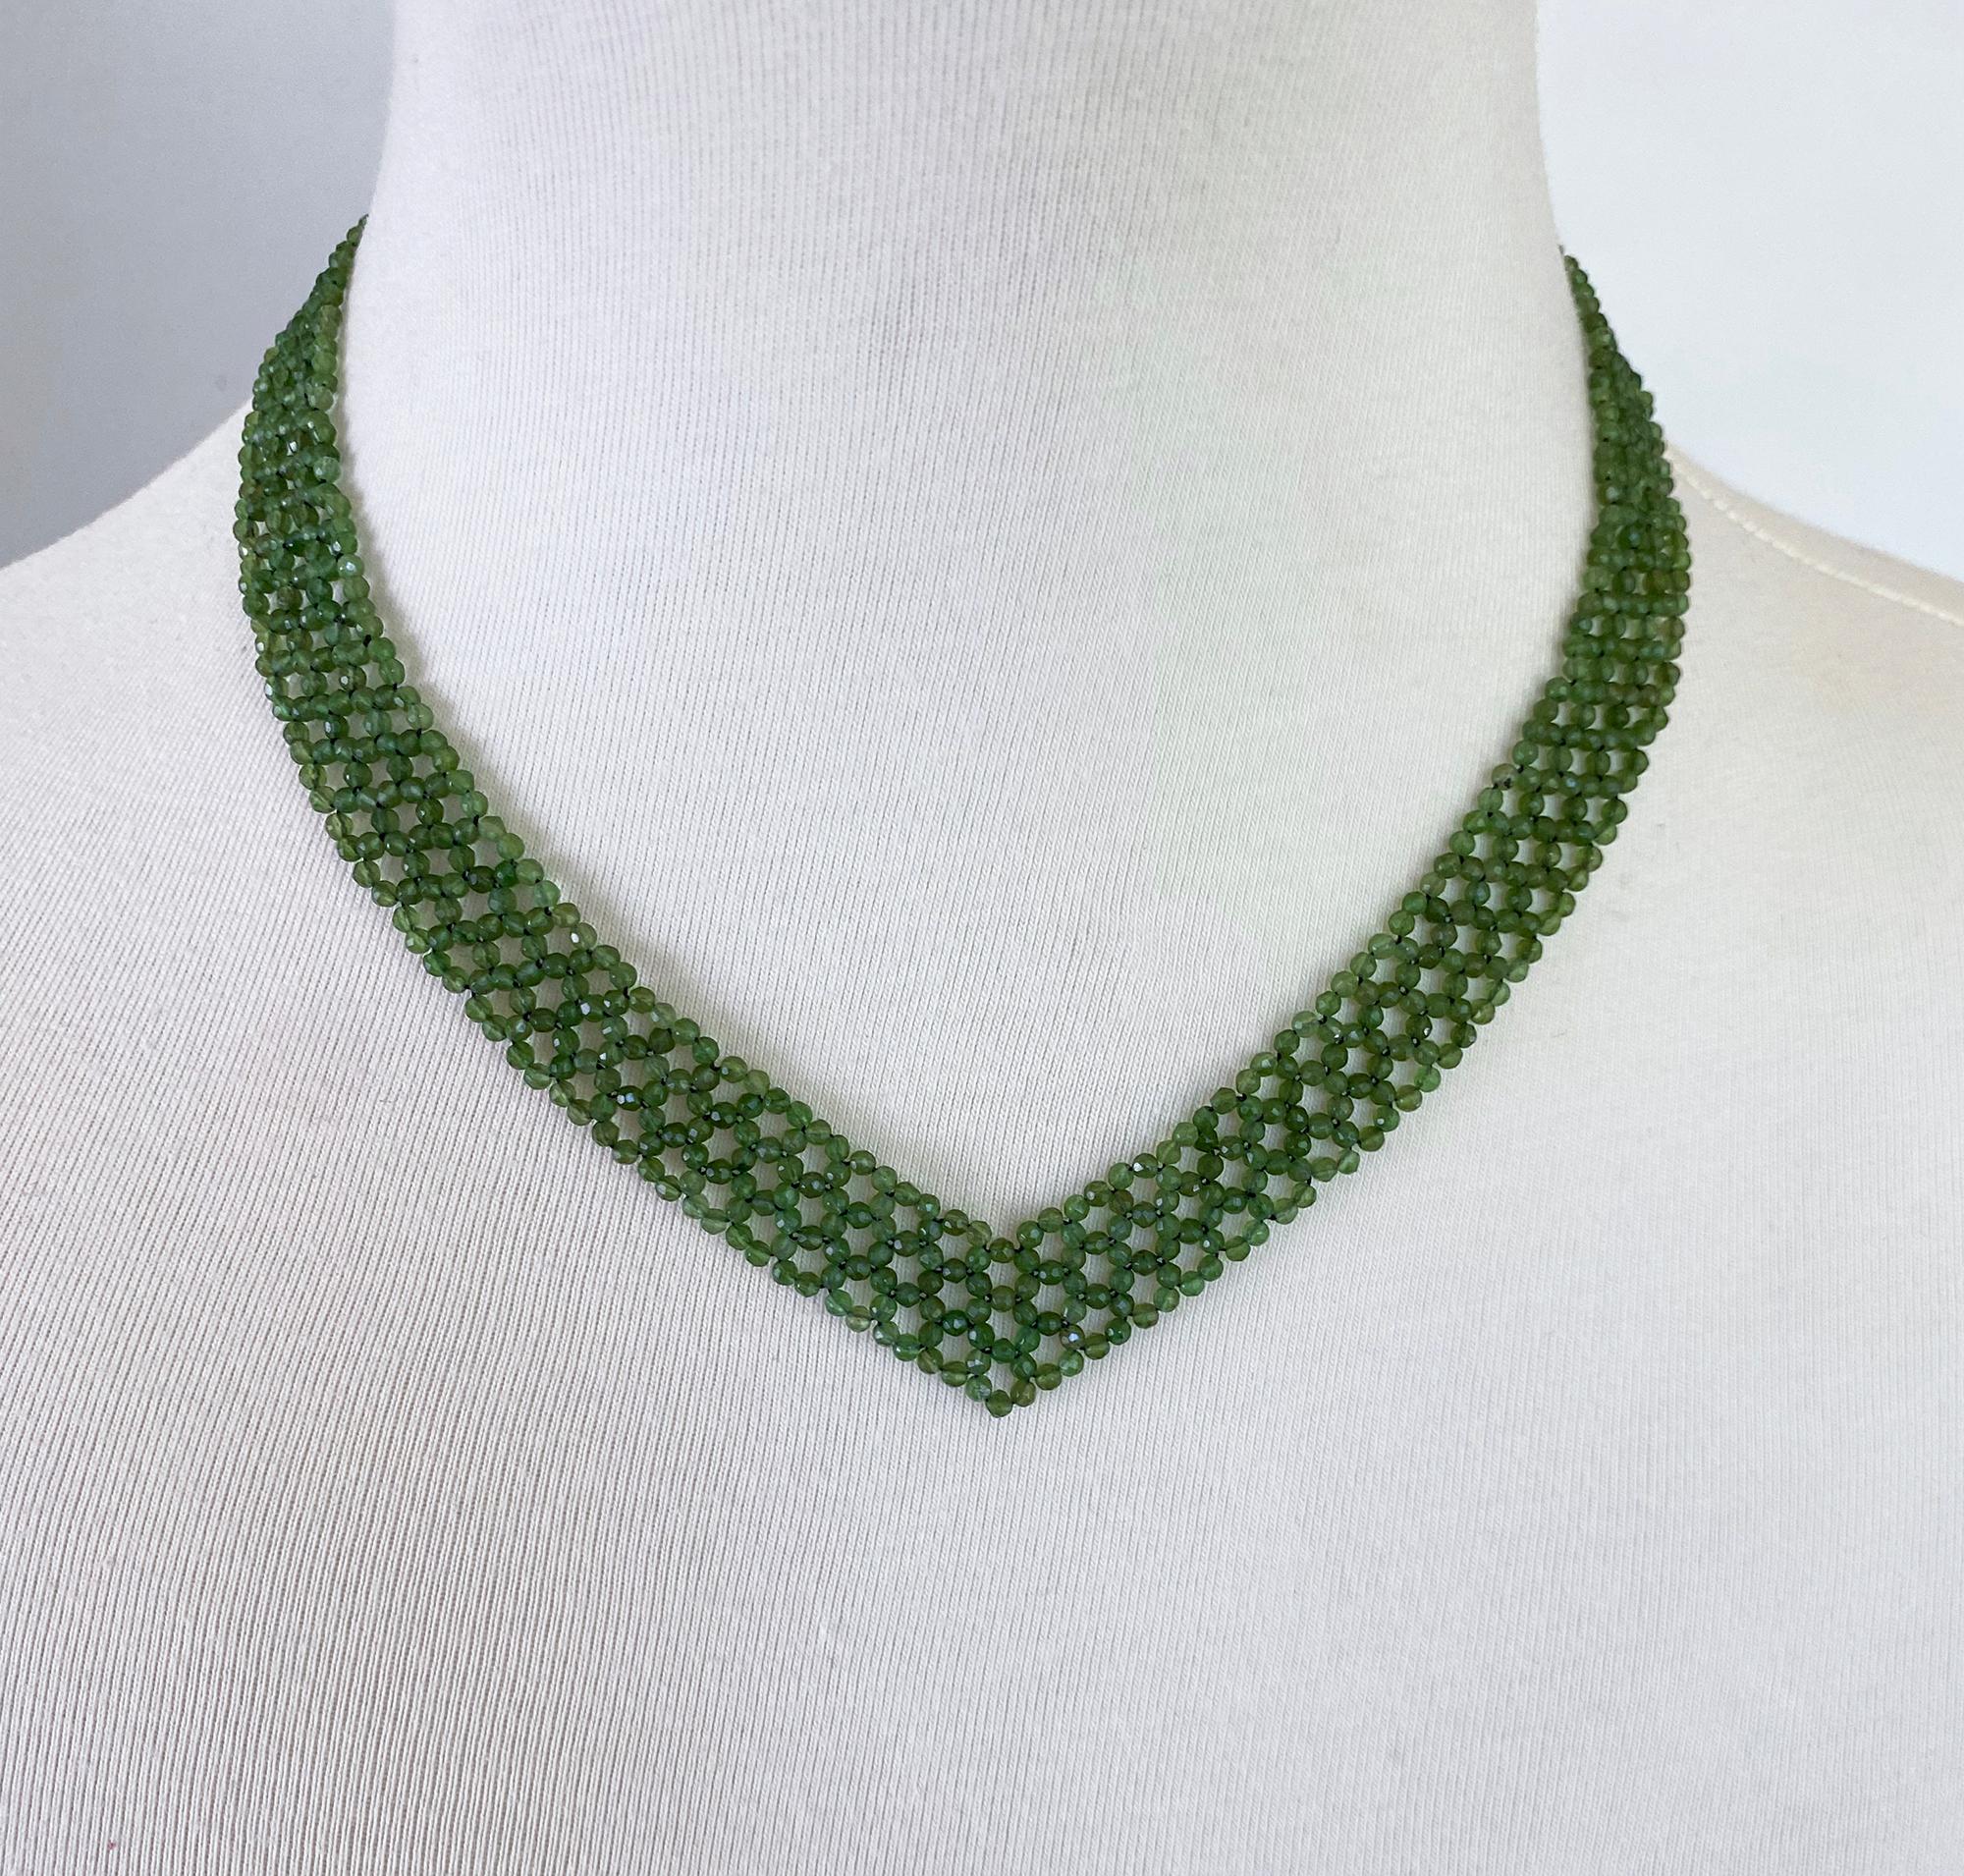 Bead Marina J Woven Green Kyanite V Necklace with solid 14k Yellow Gold Clasp